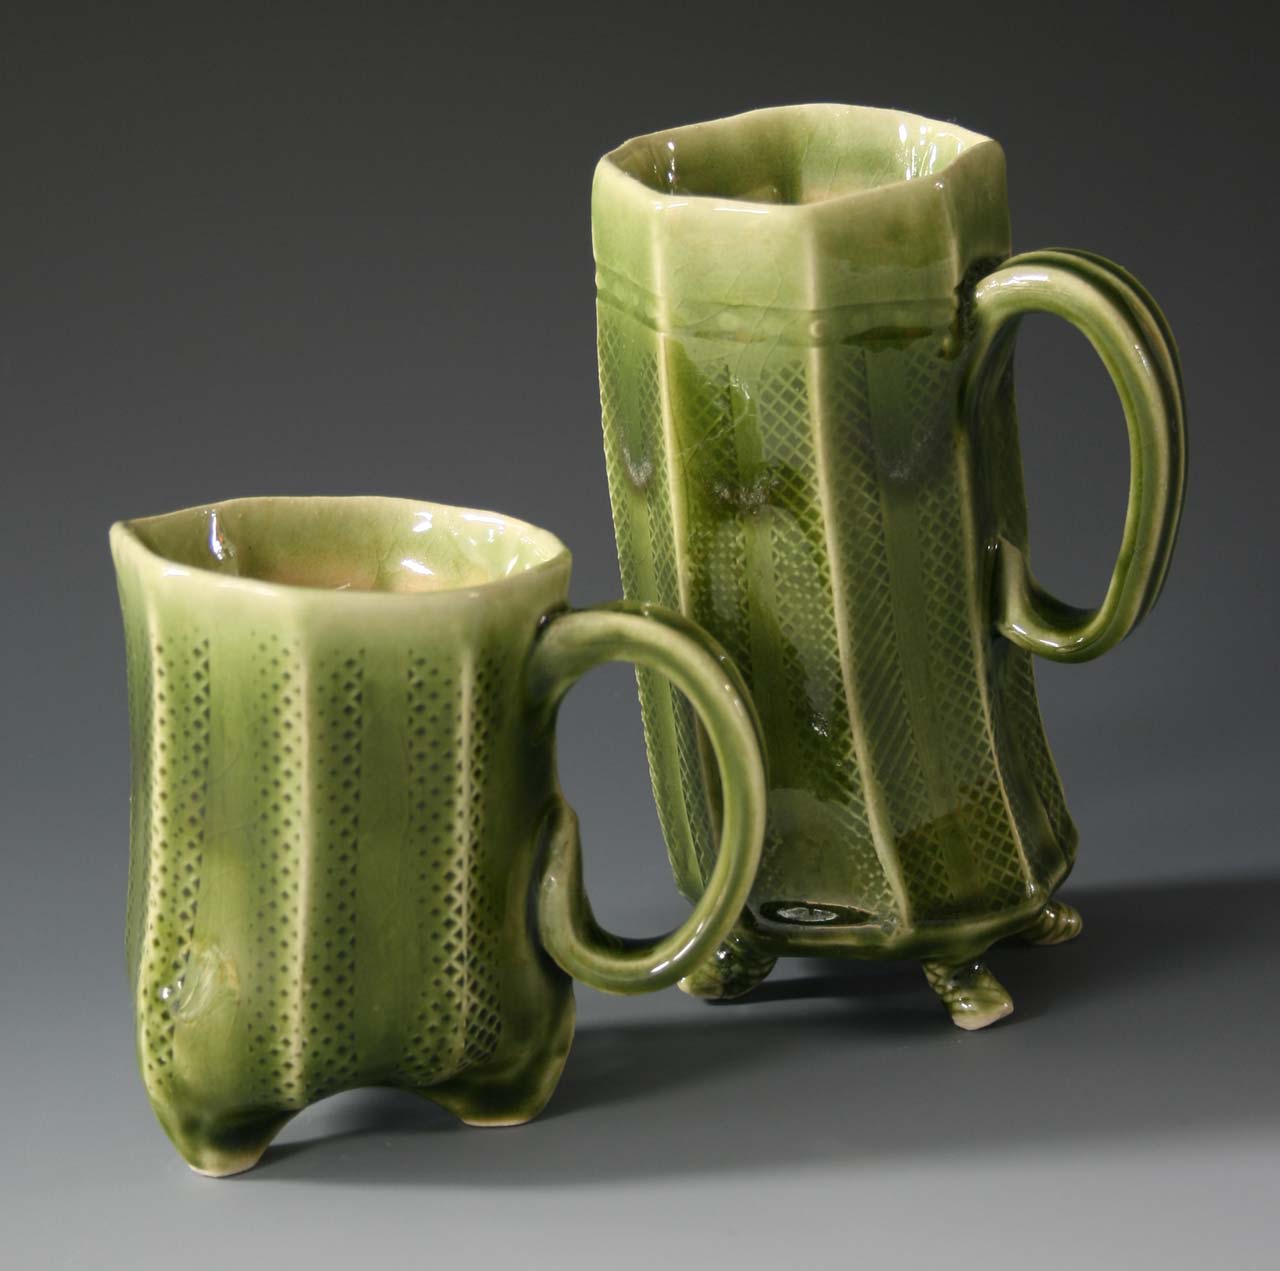 extruded clay mugs made in our handbuilding class